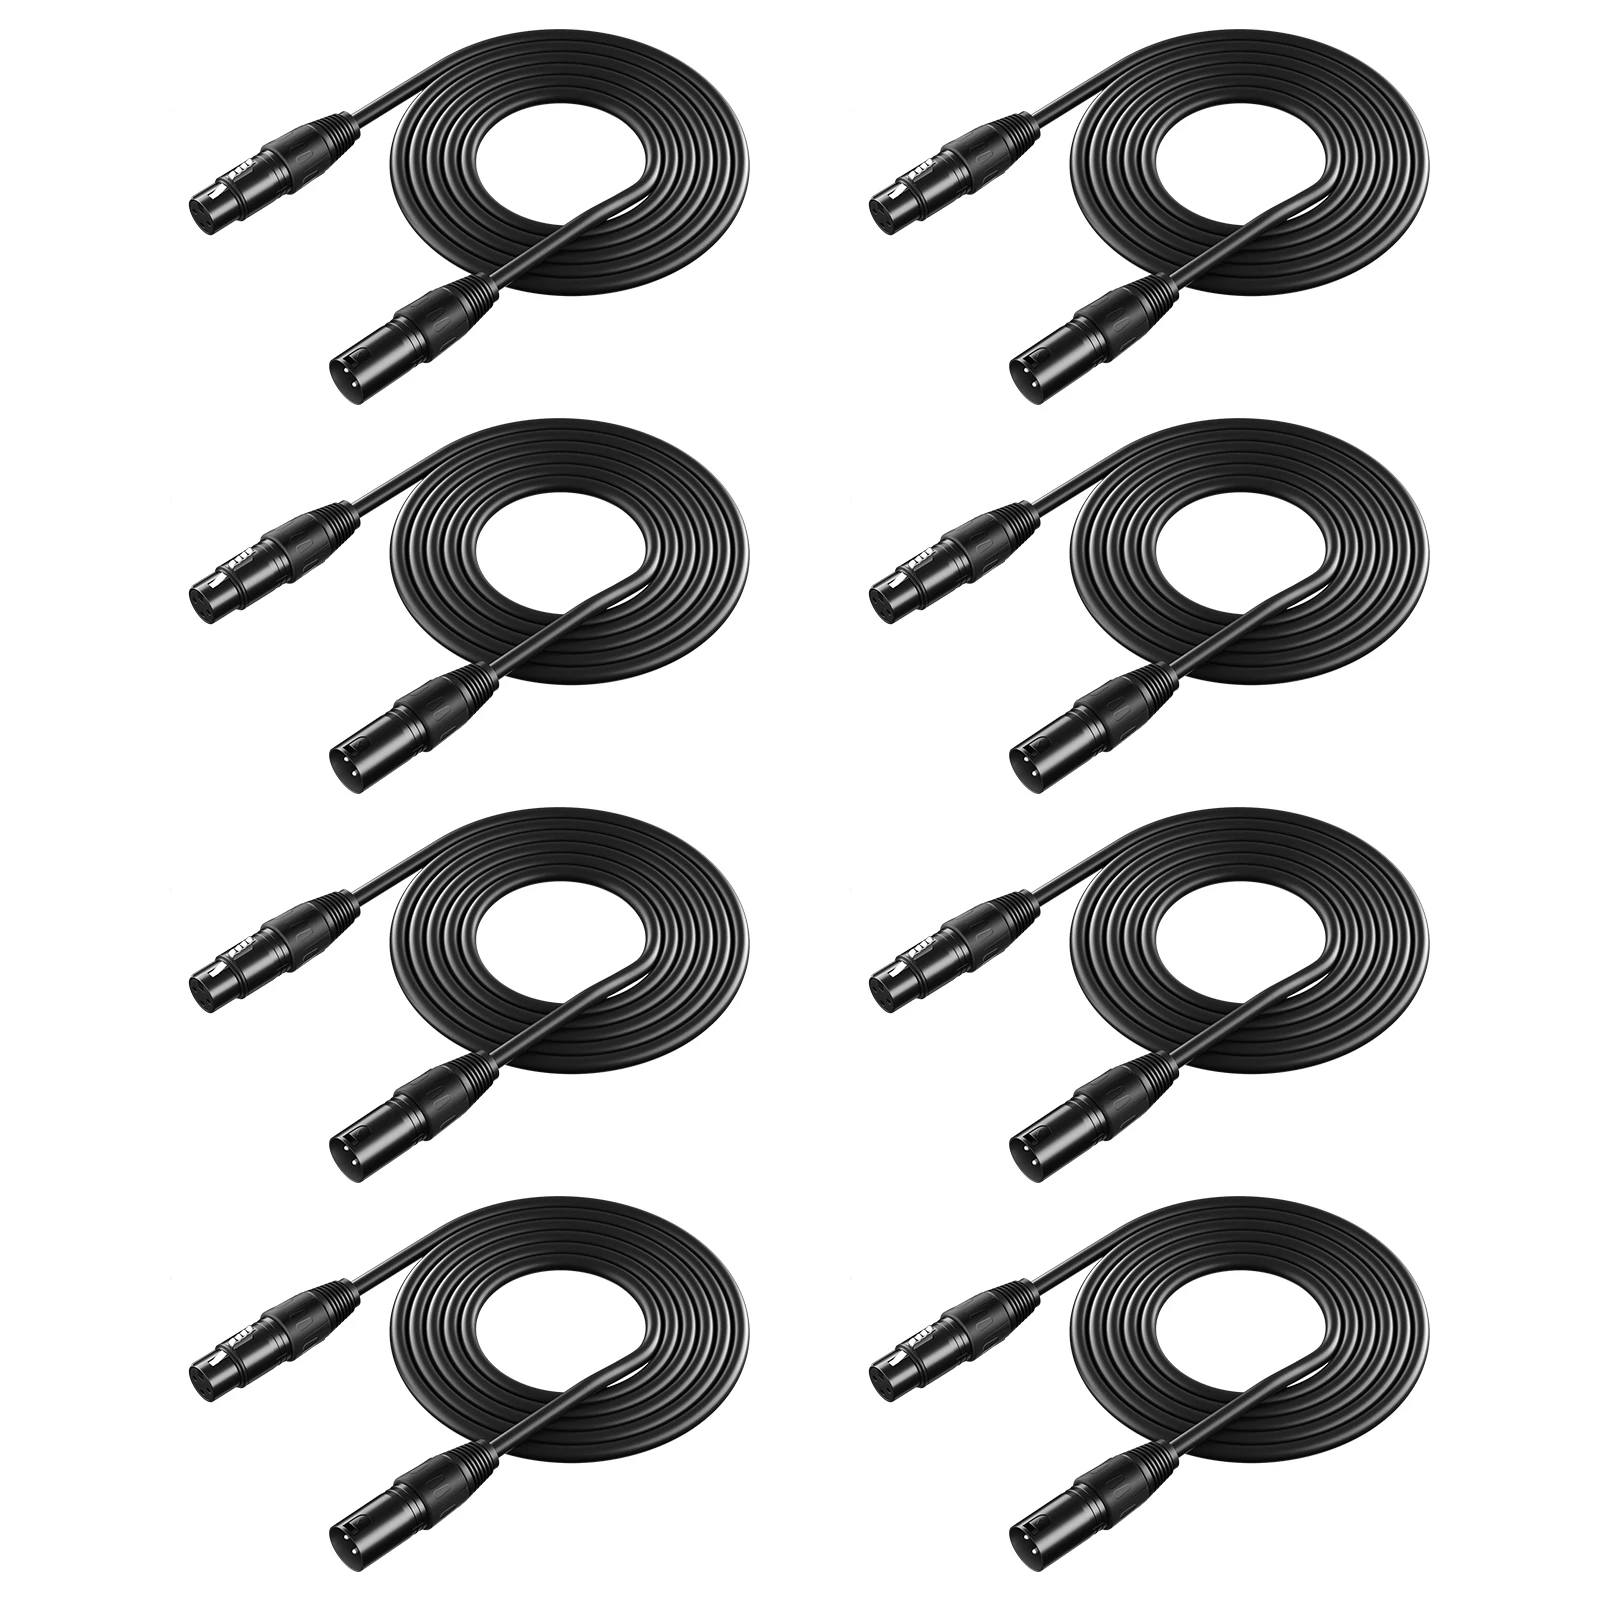 Neewer 8 Pack 6.5 feet/2 meters DMX Stage Light Cable Wires with 3 Pin Signal XLR Male to Female Connection for Moving Head Light Par Light Spotlight with XLR Input and Output 